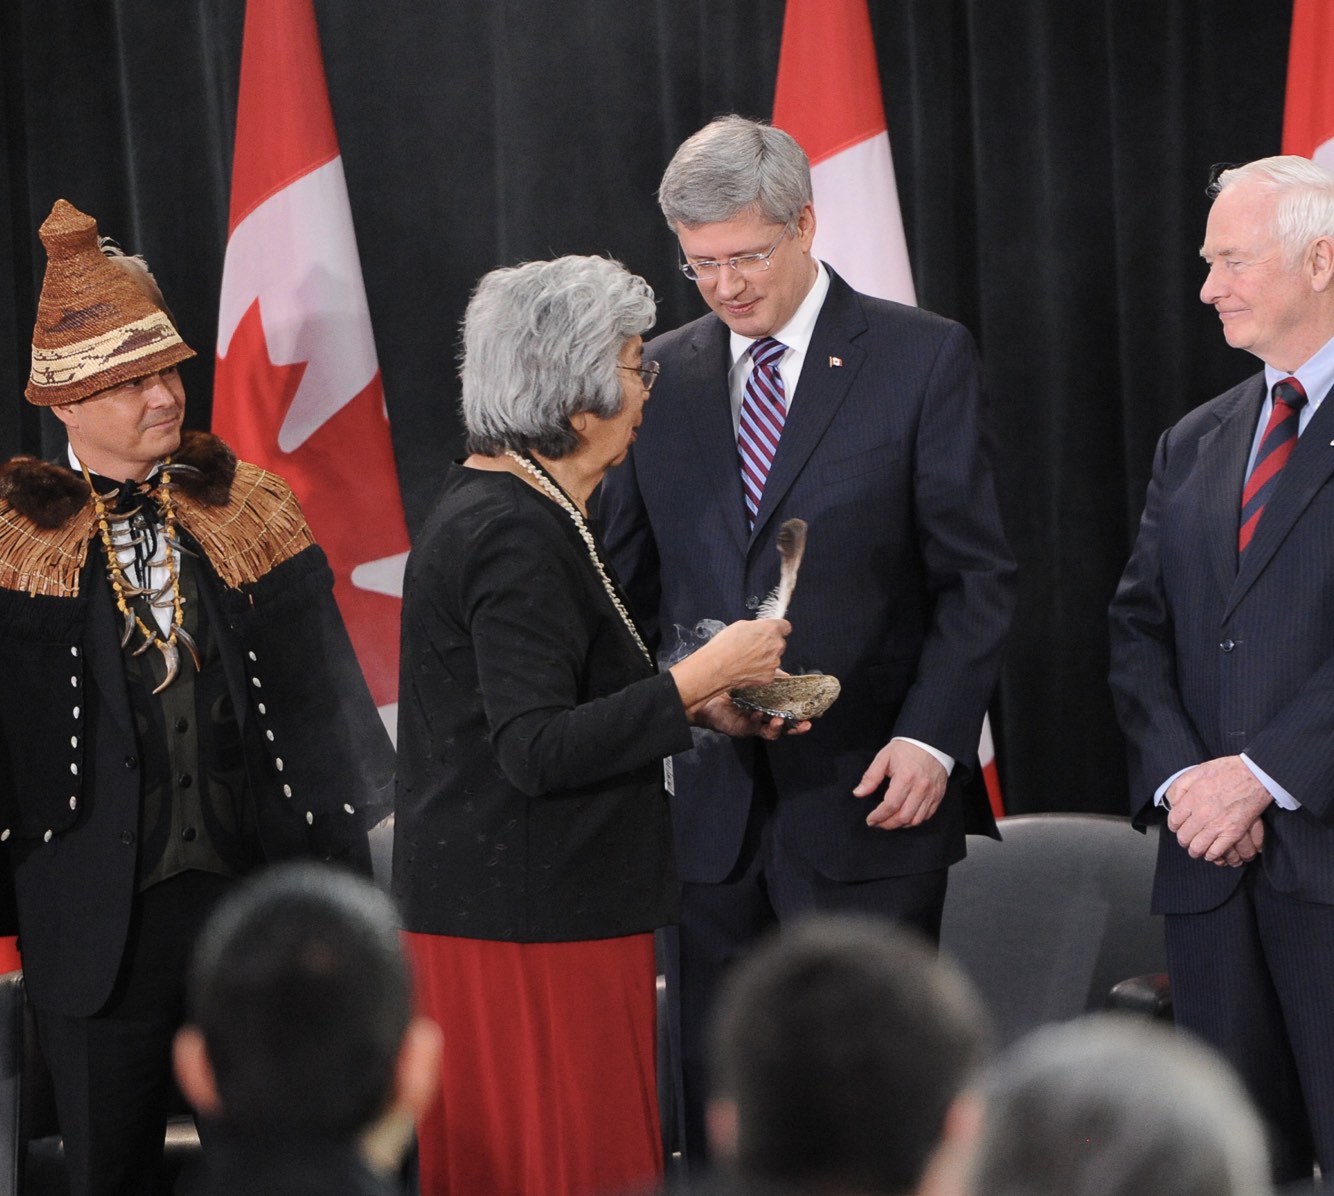 Crown-First Nations Gathering, with the late Elder Bertha Commonda smudging Prime Minister Harper along with National Chief Shawn Atleo and Governor General David Johnston.